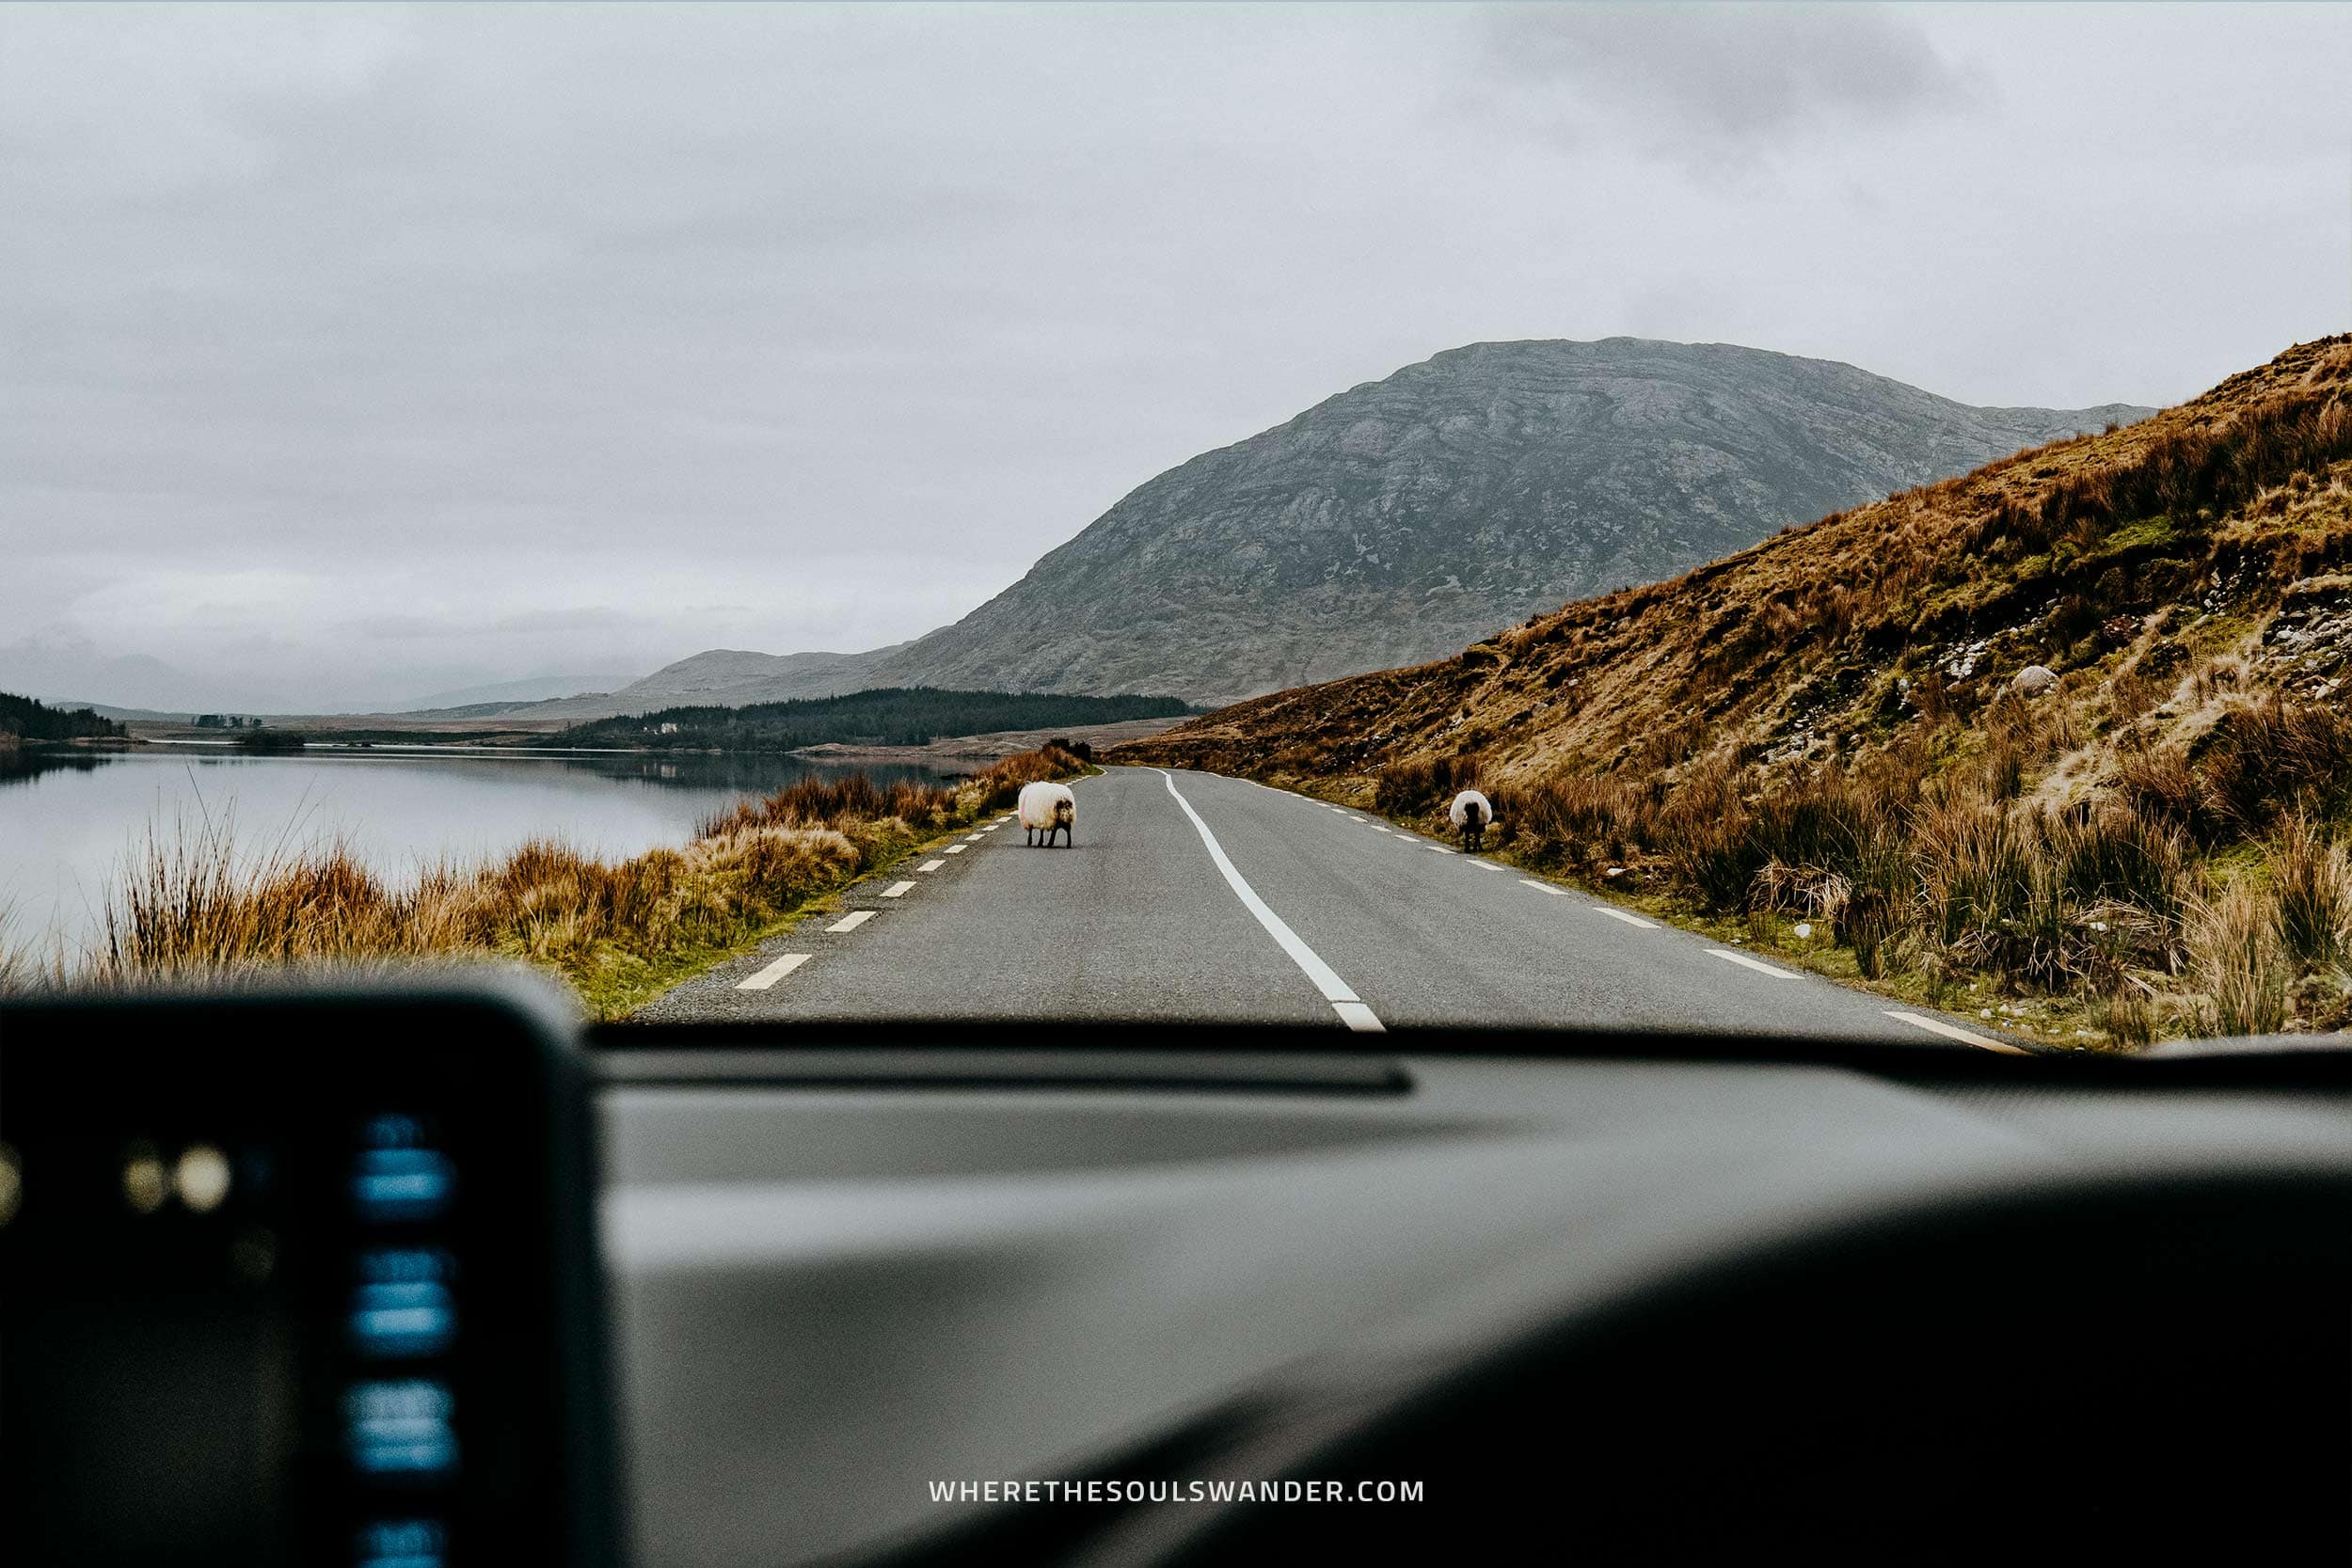 How to get to Connemara National Park